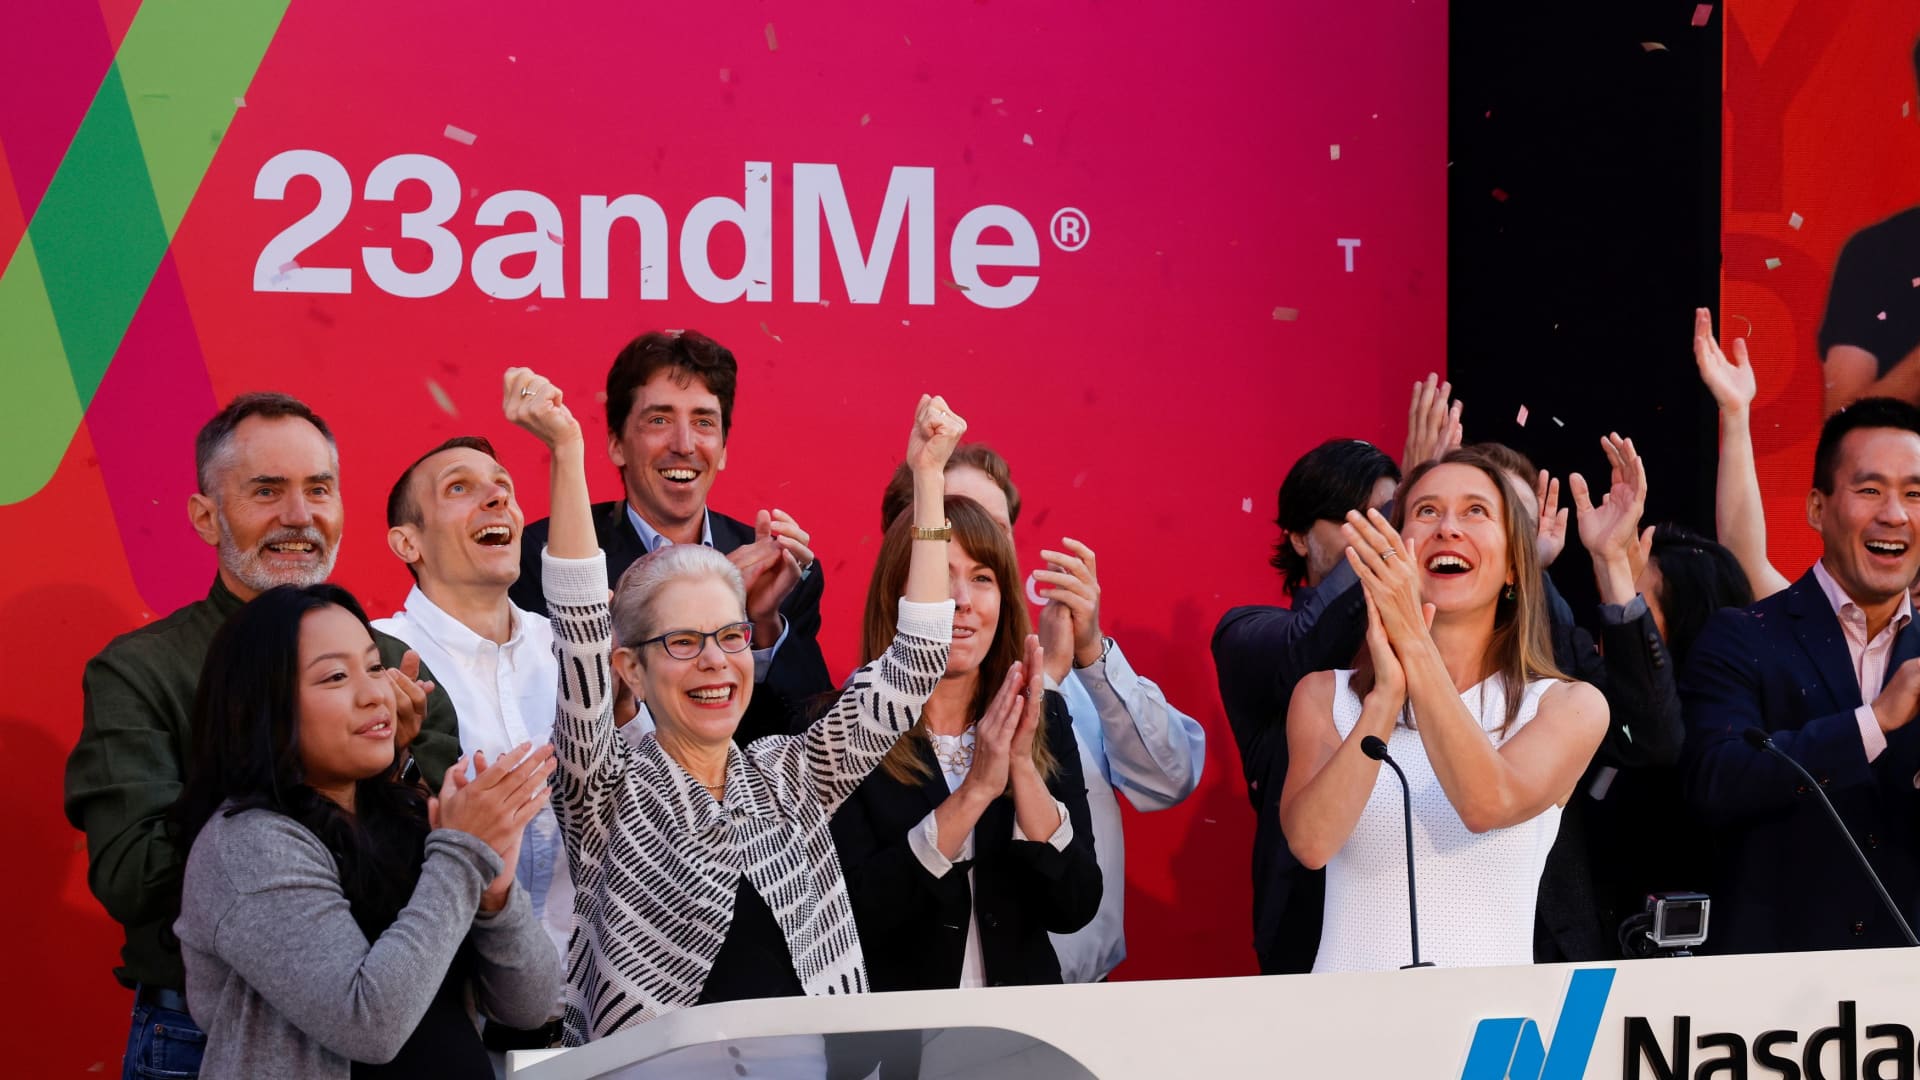 Anne Wojcicki, 23andMe co-founder & CEO (right) celebrates with 23andMe employees after remotely ringing the NASDAQ opening bell at the headquarters of DNA tech company 23andMe in Sunnyvale, California, U.S., June 17, 2021.